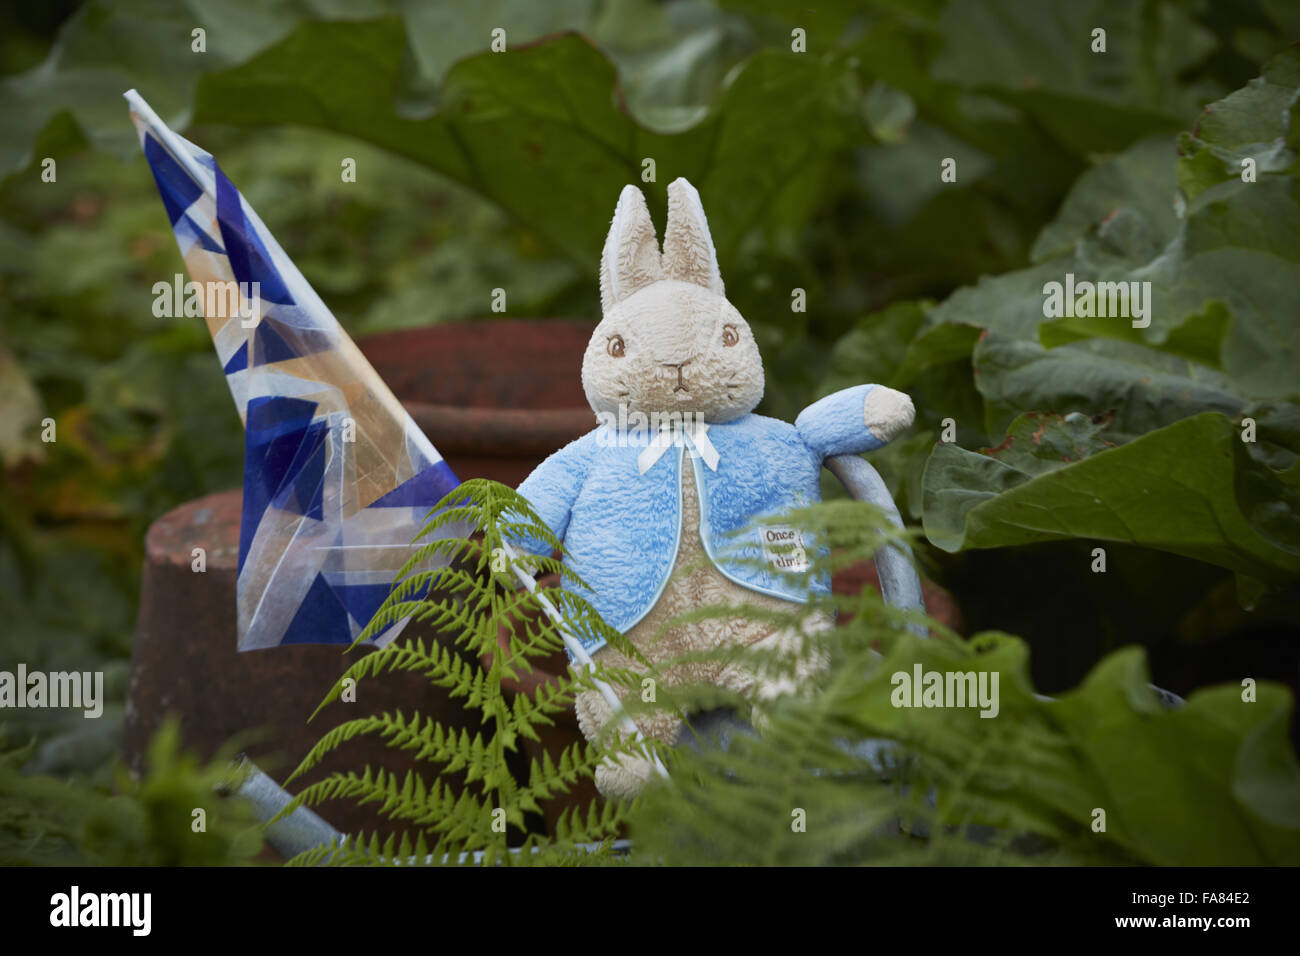 Peter Rabbit toy in the garden at Hill Top, near Sawrey, Cumbria. The house was owned by Beatrix Potter from 1905 until her death in 1943. Photograph shows objects that may be trademarked Stock Photo